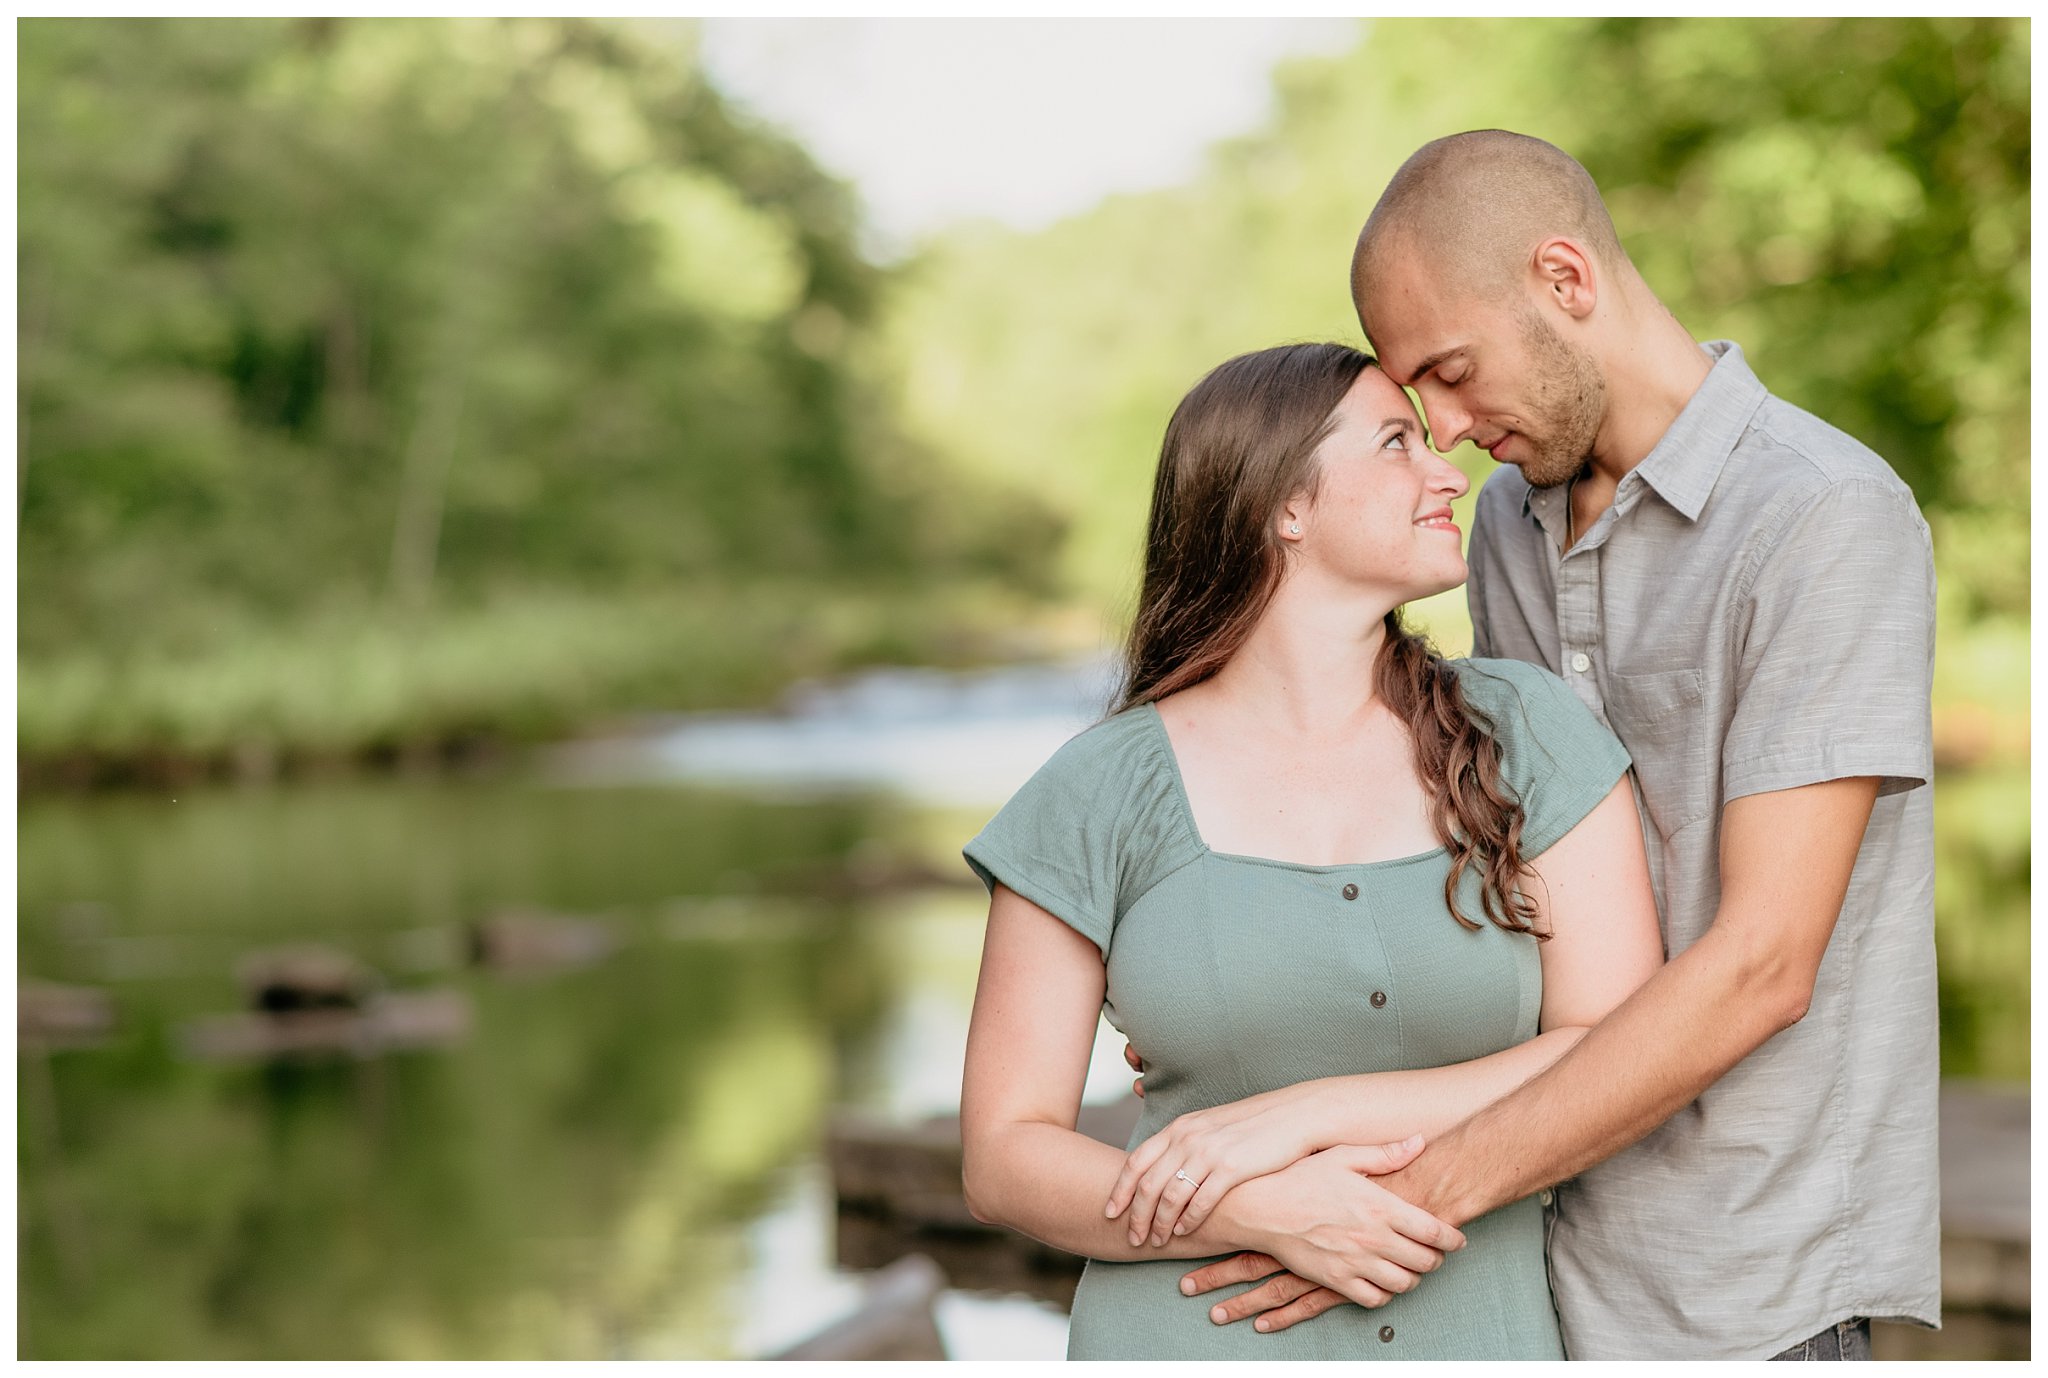 Salmon River Falls Engagement Session Joanna Young Photography_0004.jpg